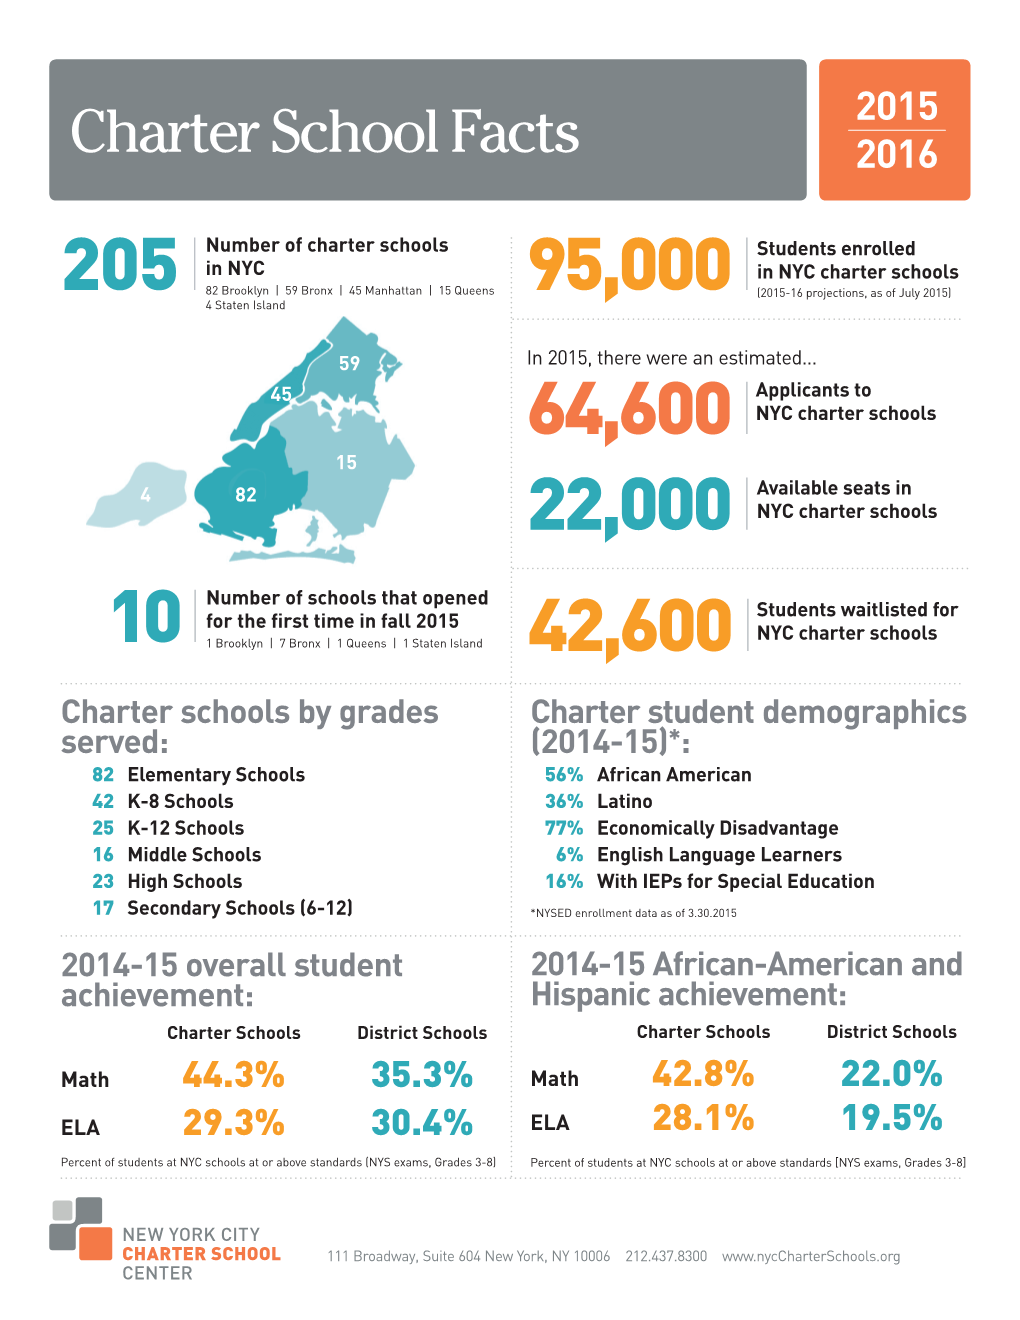 Charter School Facts 2016